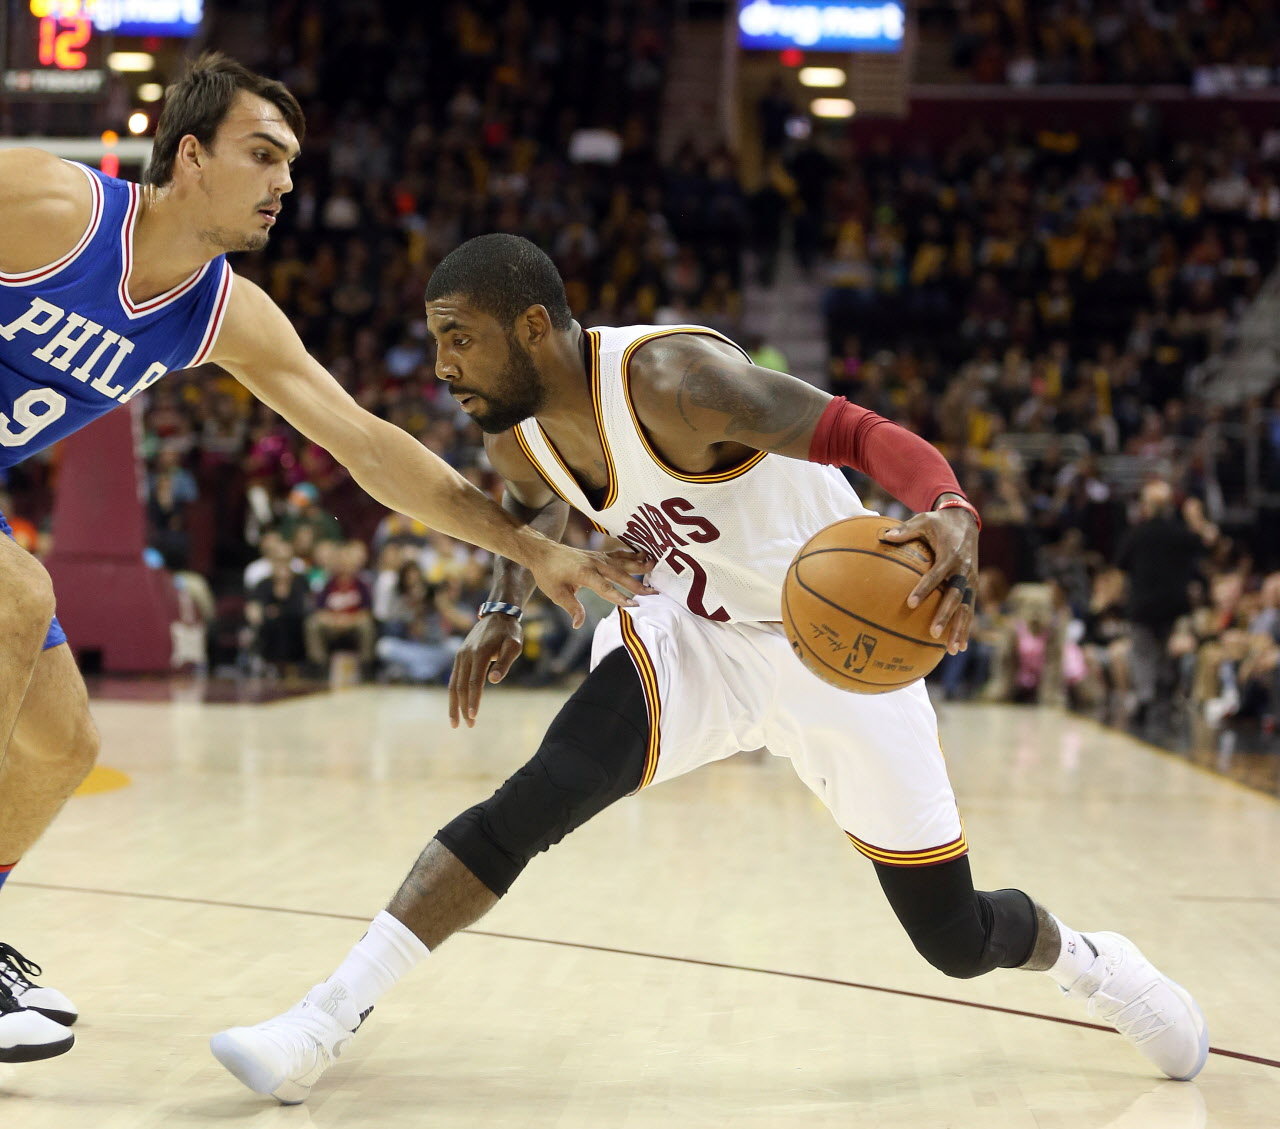 Philadelphia 76ers vs Cleveland Cavaliers (BETTING TIPS, Match Preview & Expert Analysis )™